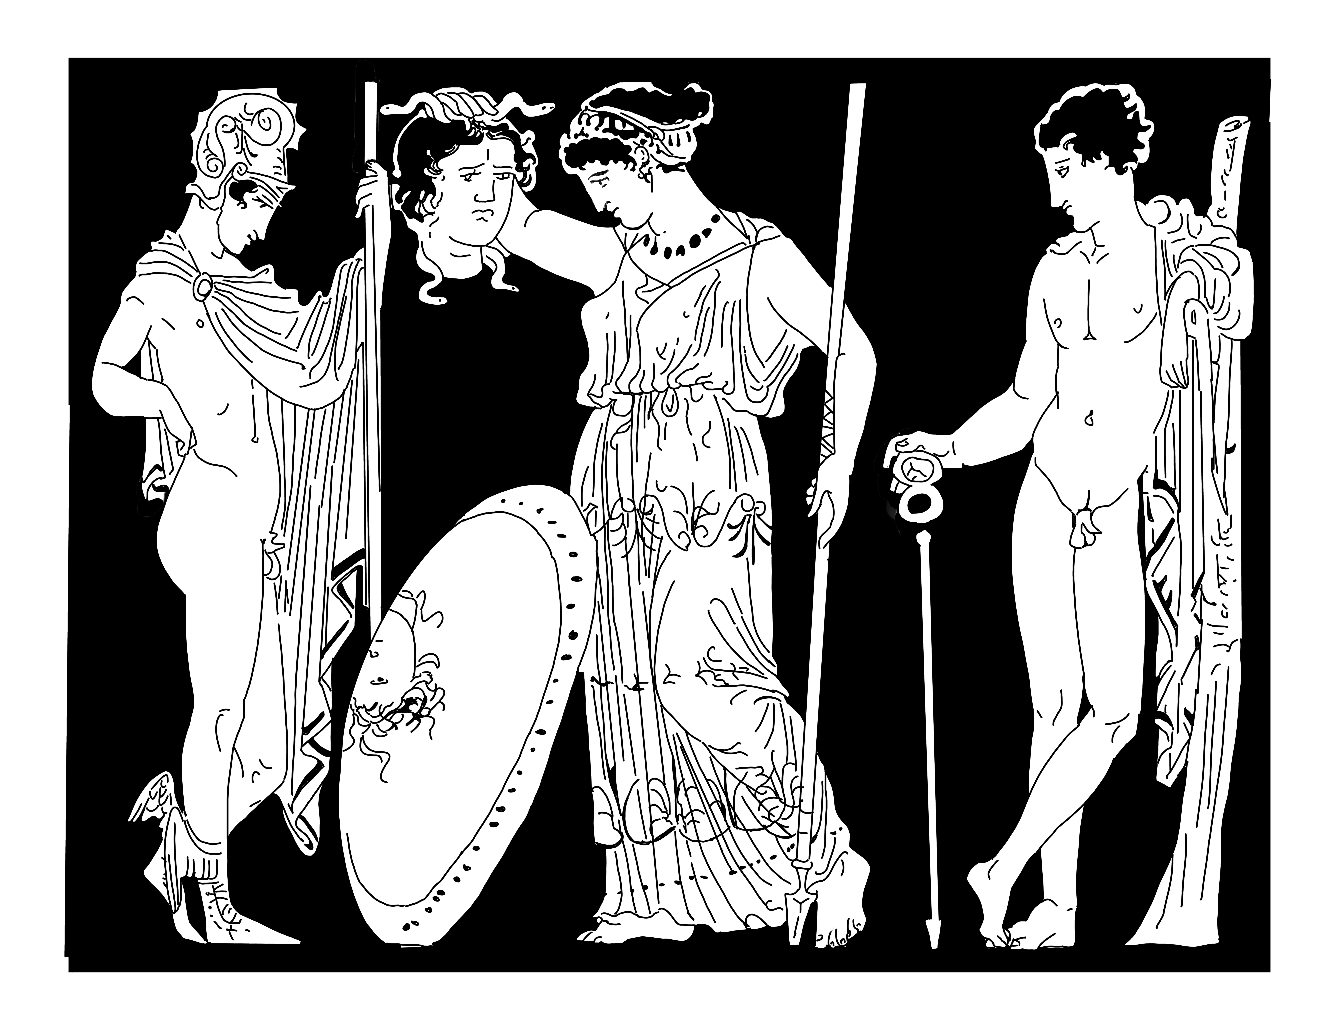 Perseus, nude with chlamys cape, curly helm, and winged boots, stands holding a spear. Athena stands next to him holding the head of Medusa. She wears a chiton and carries a spear, and her shield with gorgoneion is propped up beside her. Hermes, nude holding a cadduceus, stands on the right leaning on a tree.